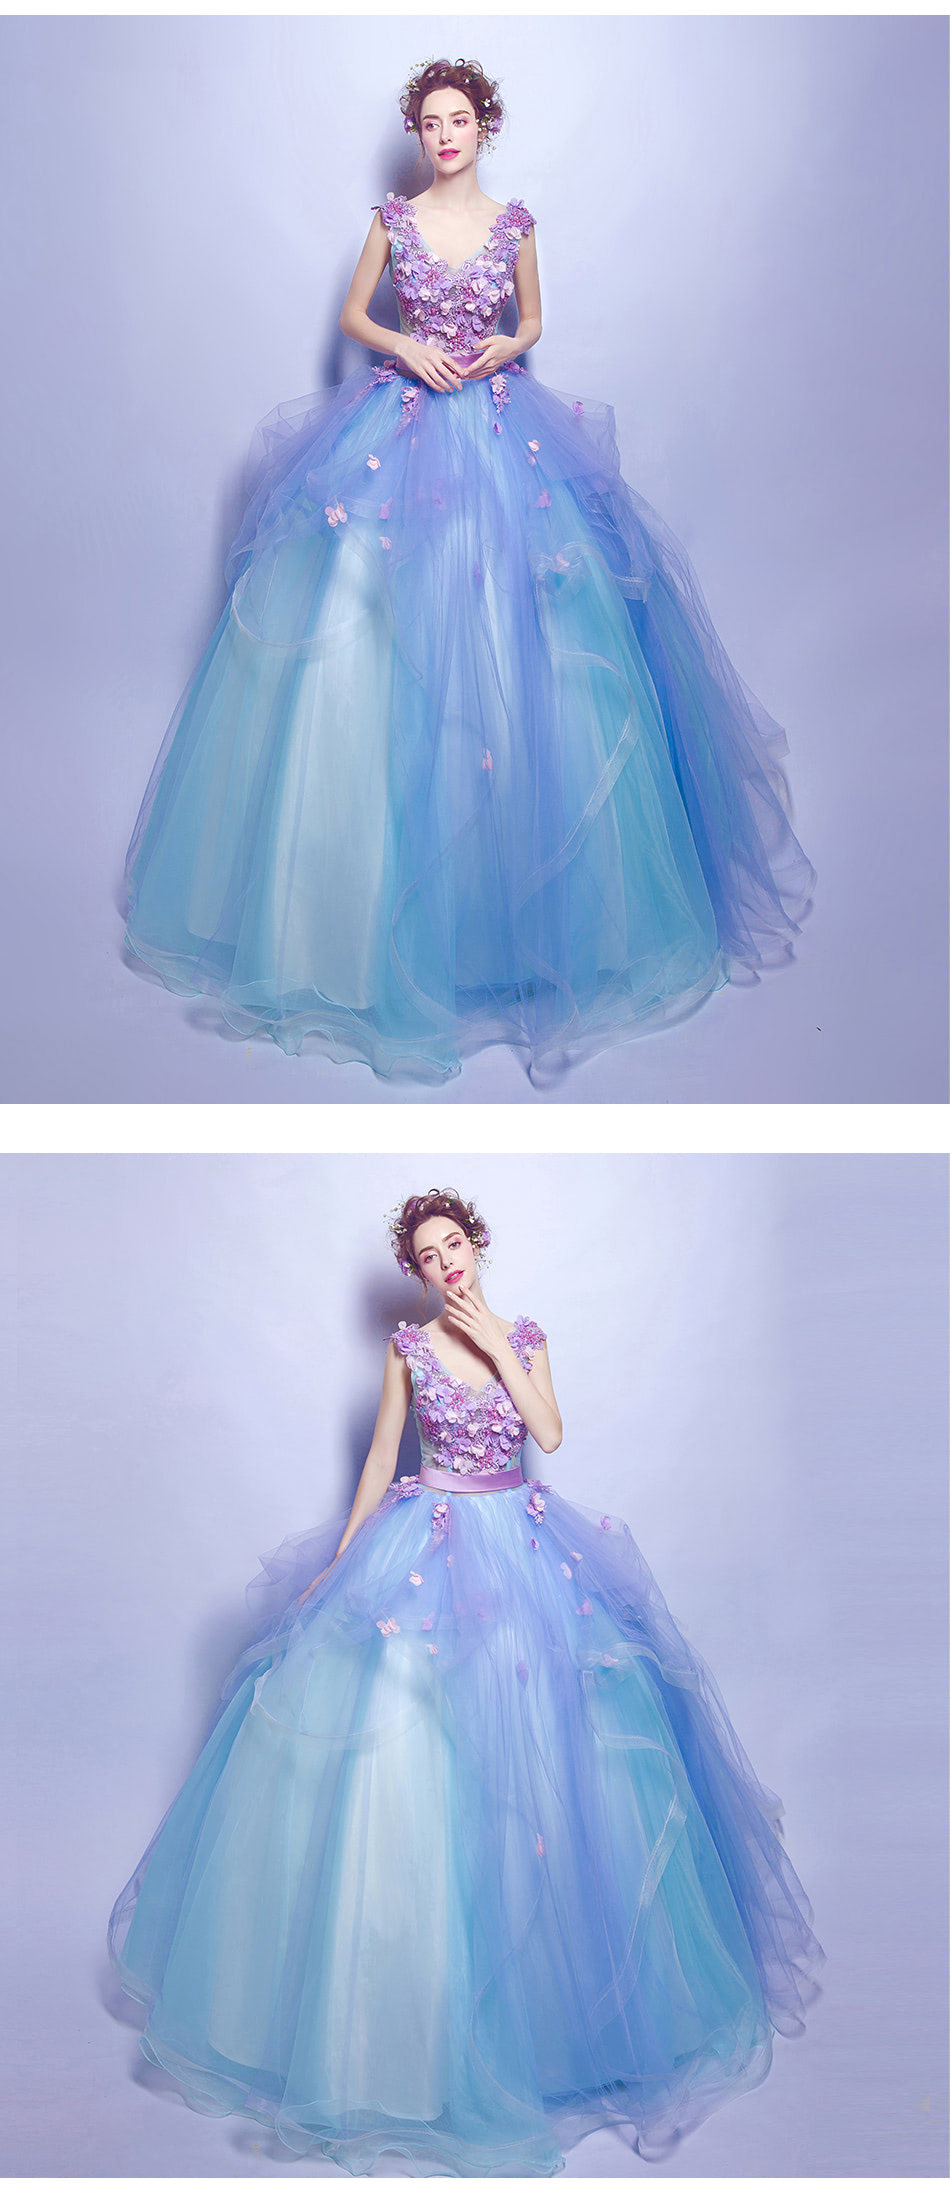 Fairy-Flower-Blue-Lace-Long-Dress-for-Banquet-Party-Show-Wedding11.jpg